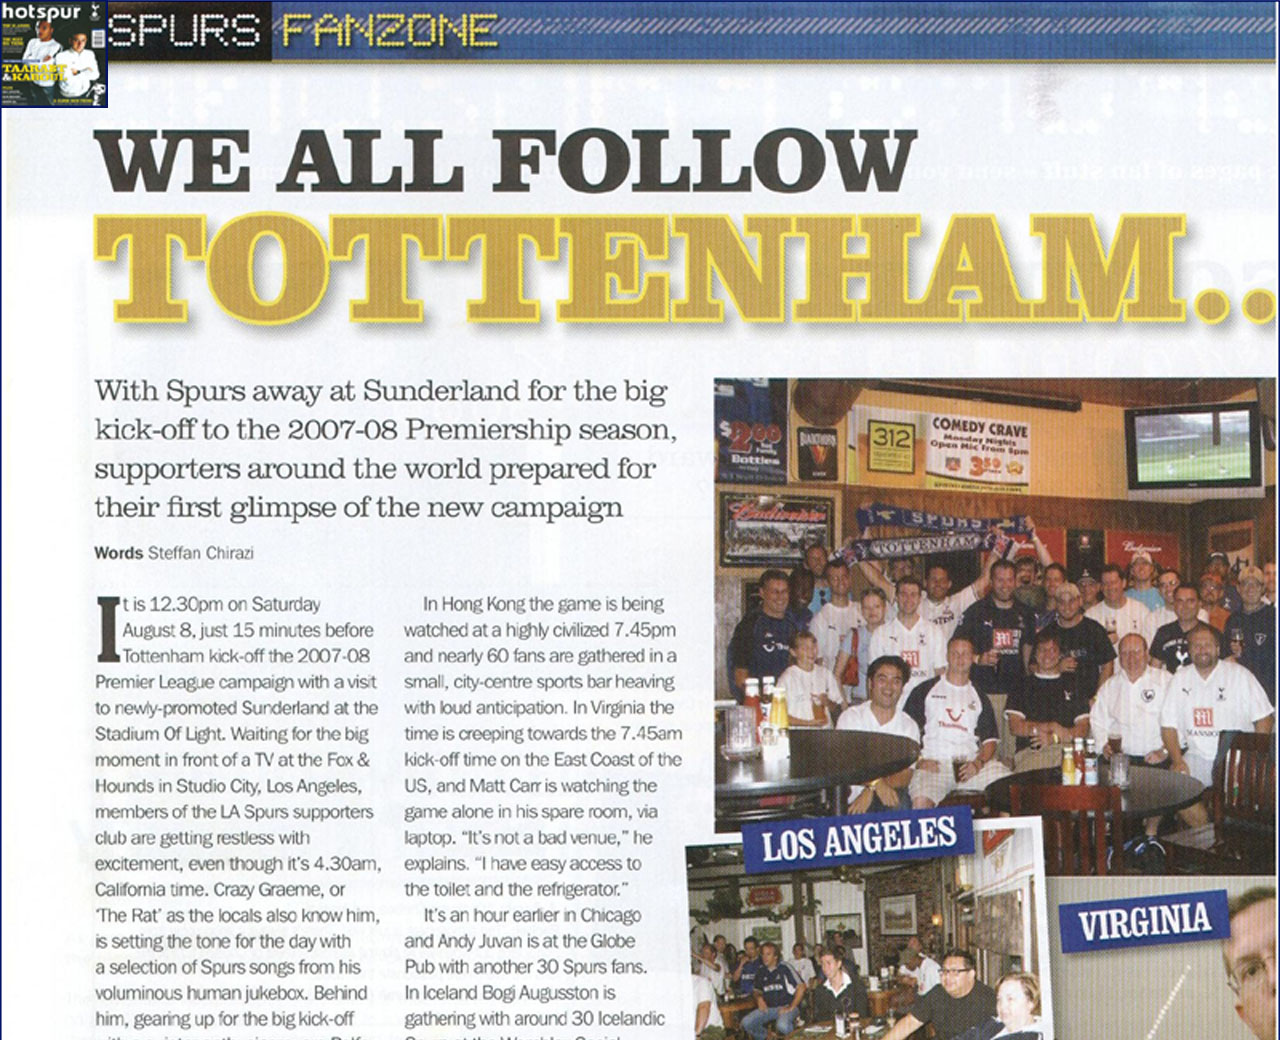 L.A. Spurs featured in October 2007 Hotspur Magazine